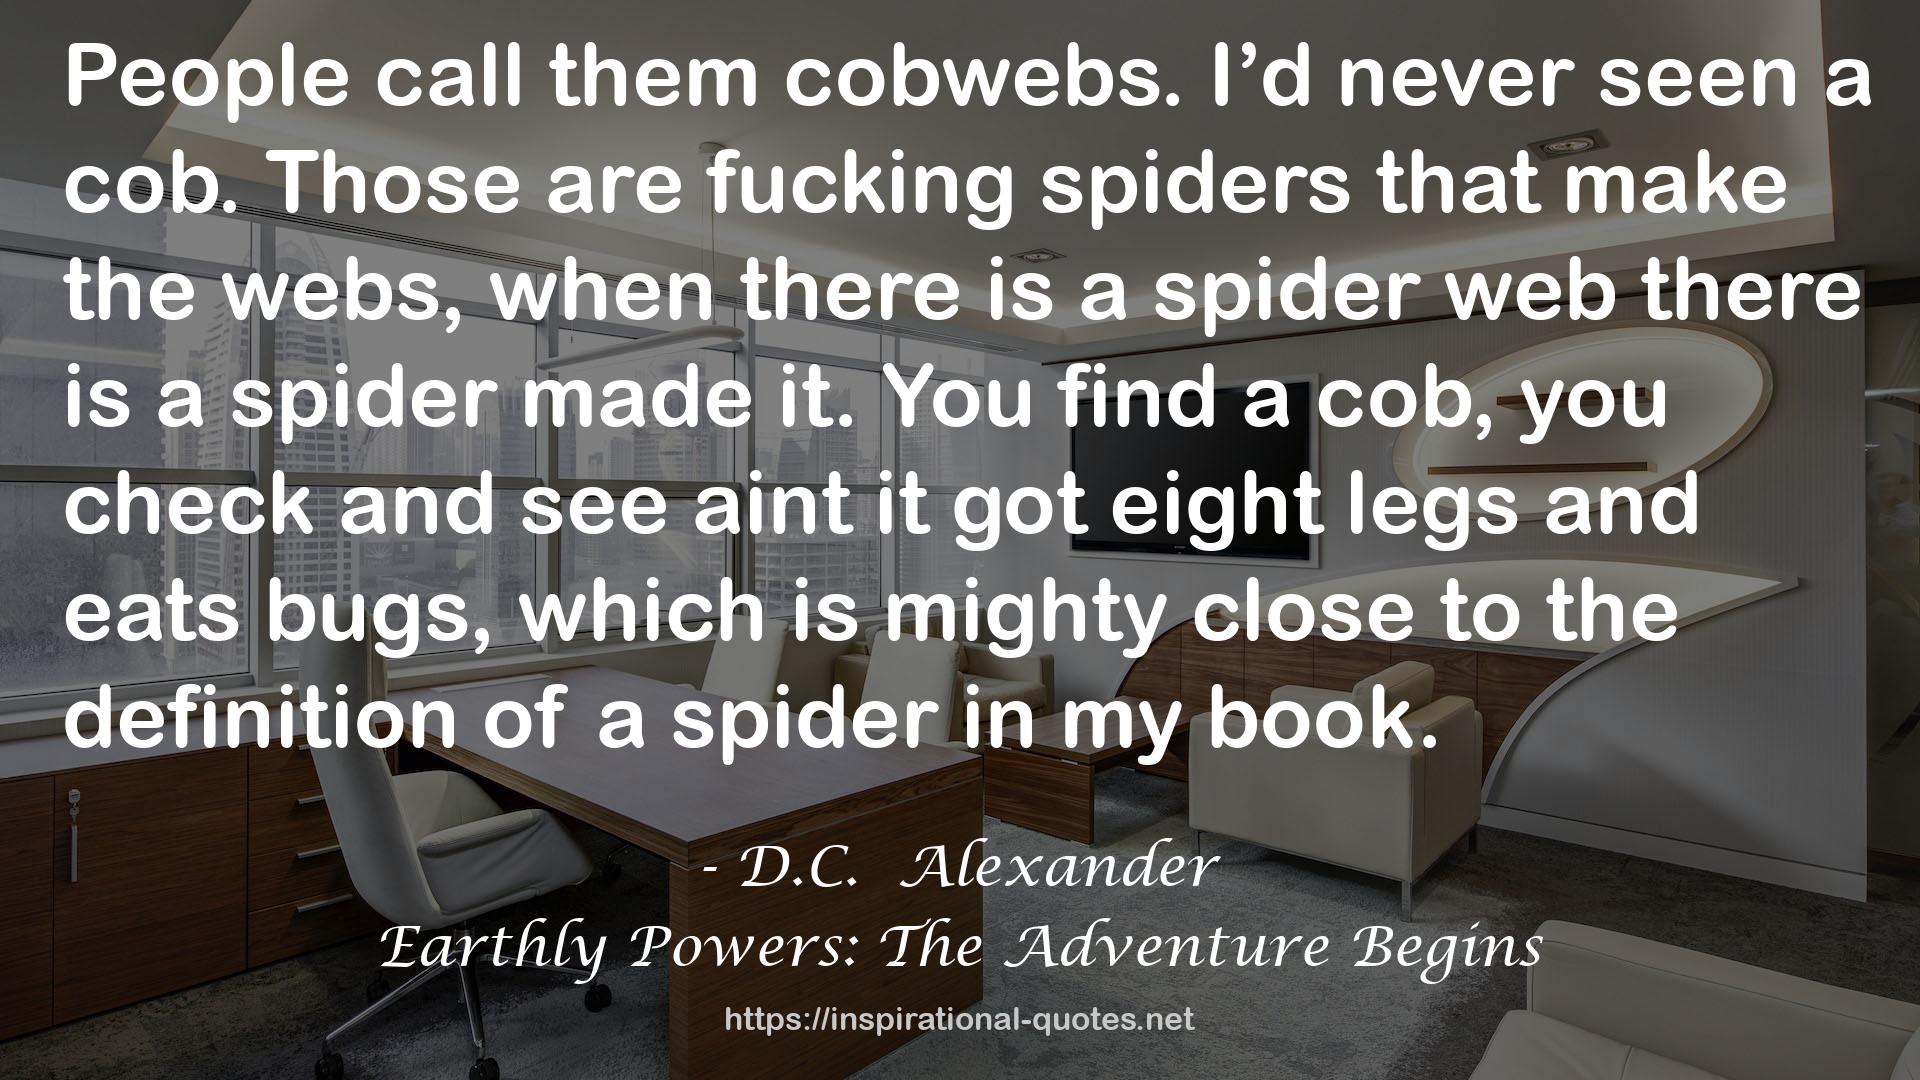 Earthly Powers: The Adventure Begins QUOTES